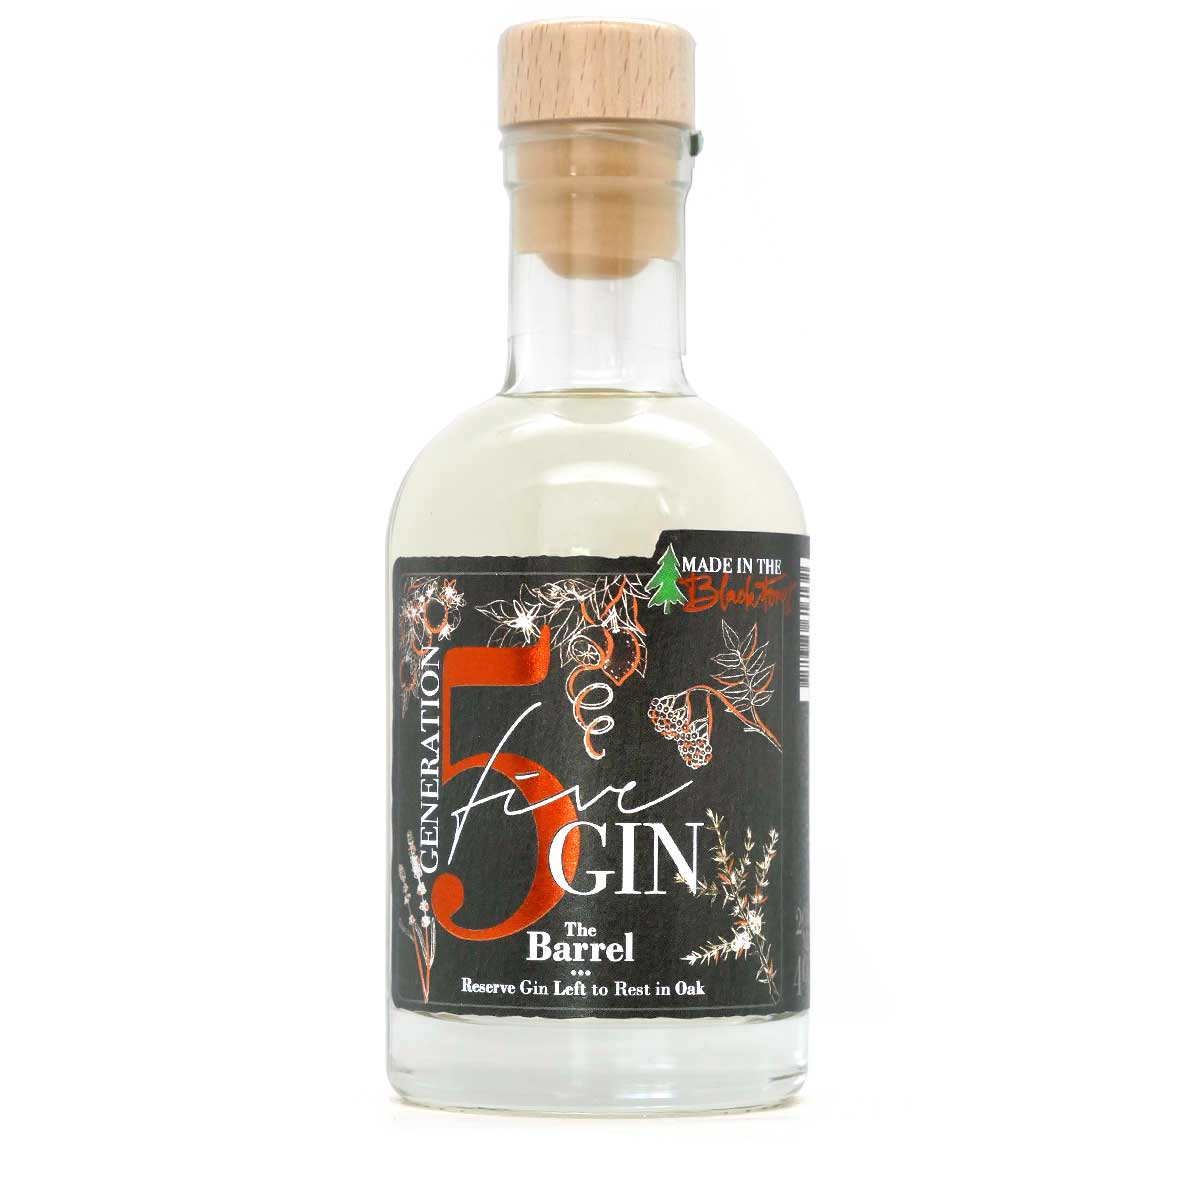 Generation PANAMA - Forest Gin Gin Black SELECT 5